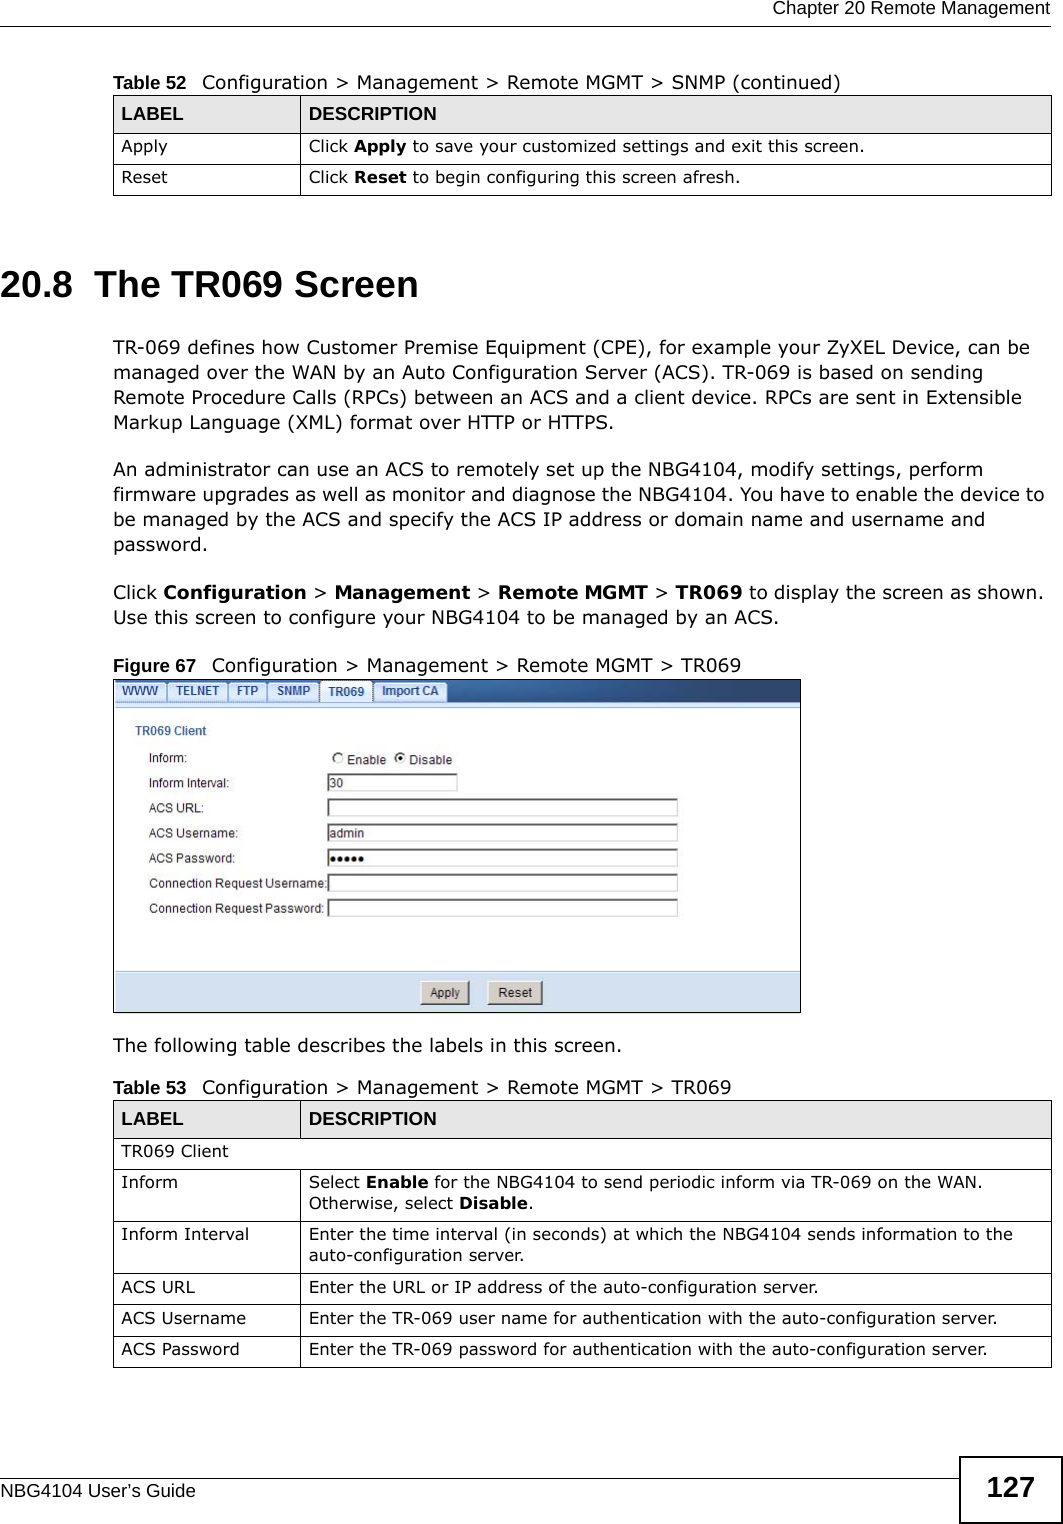  Chapter 20 Remote ManagementNBG4104 User’s Guide 12720.8  The TR069 ScreenTR-069 defines how Customer Premise Equipment (CPE), for example your ZyXEL Device, can be managed over the WAN by an Auto Configuration Server (ACS). TR-069 is based on sending Remote Procedure Calls (RPCs) between an ACS and a client device. RPCs are sent in Extensible Markup Language (XML) format over HTTP or HTTPS. An administrator can use an ACS to remotely set up the NBG4104, modify settings, perform firmware upgrades as well as monitor and diagnose the NBG4104. You have to enable the device to be managed by the ACS and specify the ACS IP address or domain name and username and password.Click Configuration &gt; Management &gt; Remote MGMT &gt; TR069 to display the screen as shown. Use this screen to configure your NBG4104 to be managed by an ACS.Figure 67   Configuration &gt; Management &gt; Remote MGMT &gt; TR069 The following table describes the labels in this screen. Apply Click Apply to save your customized settings and exit this screen. Reset Click Reset to begin configuring this screen afresh.Table 52   Configuration &gt; Management &gt; Remote MGMT &gt; SNMP (continued)LABEL DESCRIPTIONTable 53   Configuration &gt; Management &gt; Remote MGMT &gt; TR069LABEL DESCRIPTIONTR069 ClientInform Select Enable for the NBG4104 to send periodic inform via TR-069 on the WAN. Otherwise, select Disable.Inform Interval Enter the time interval (in seconds) at which the NBG4104 sends information to the auto-configuration server.ACS URL Enter the URL or IP address of the auto-configuration server.ACS Username Enter the TR-069 user name for authentication with the auto-configuration server.ACS Password Enter the TR-069 password for authentication with the auto-configuration server.